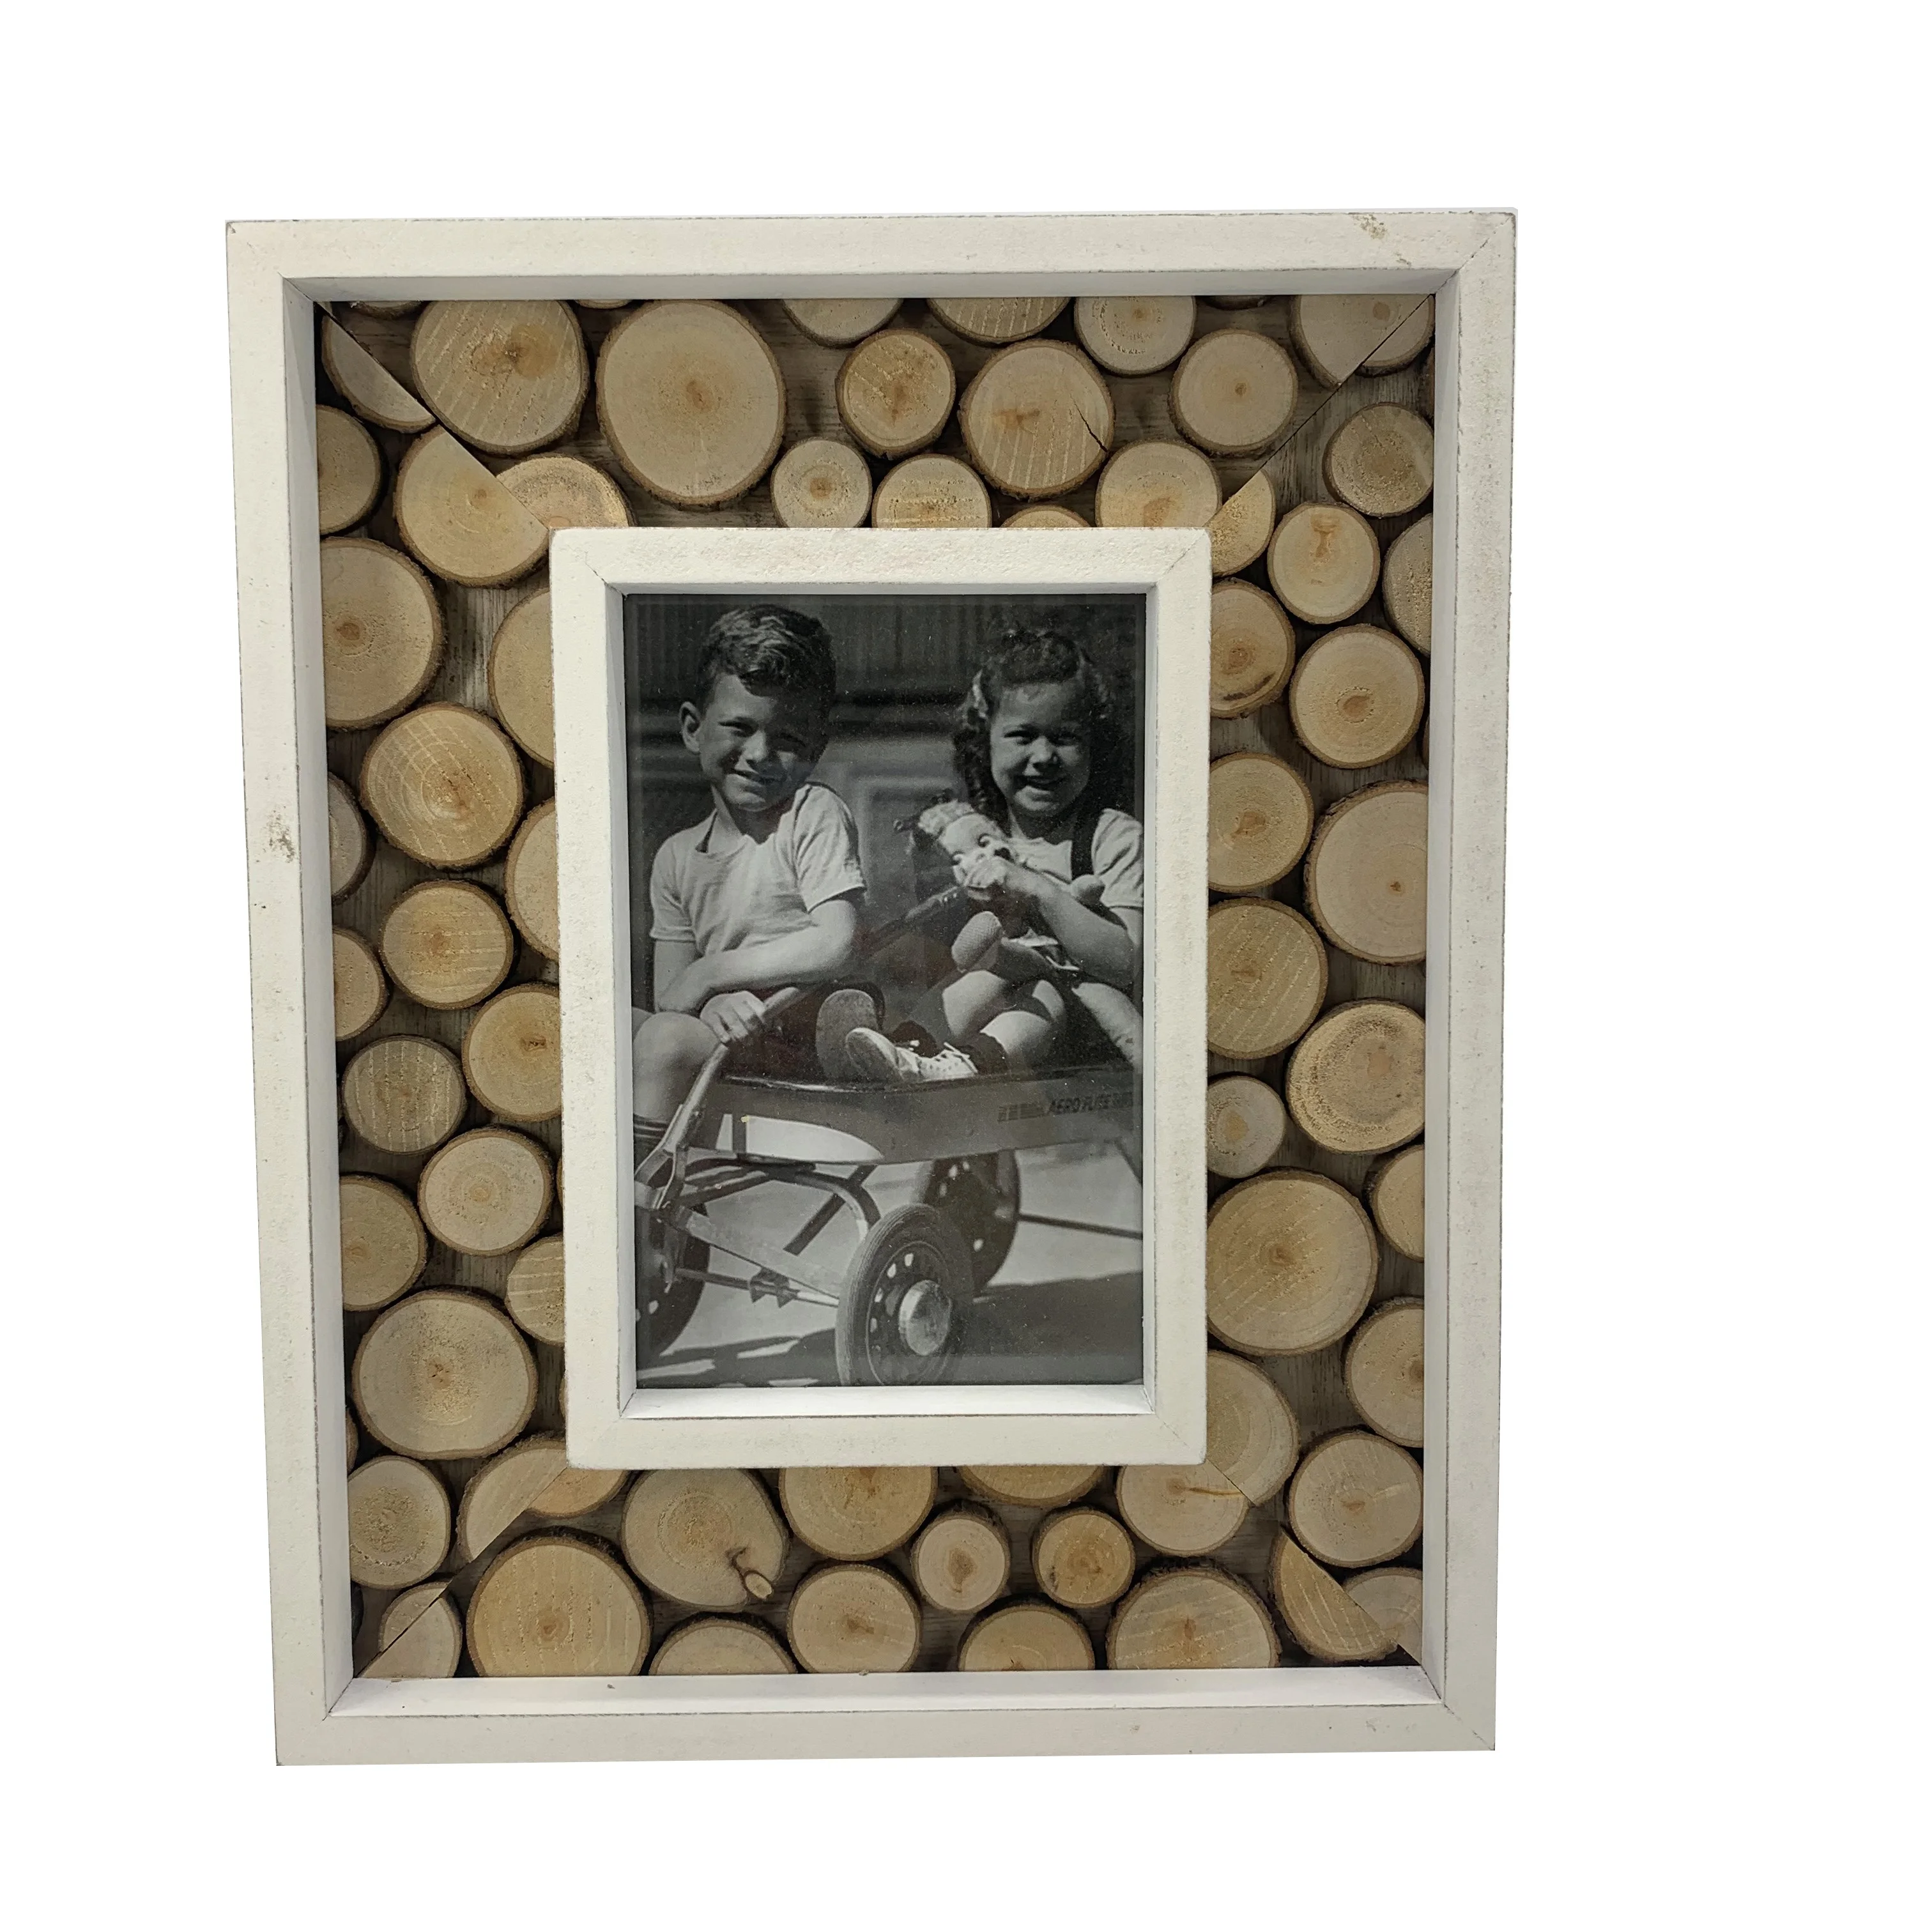 4x6 Picture Frame Distressed Wood Holds a 4x6 Photo Gray and White